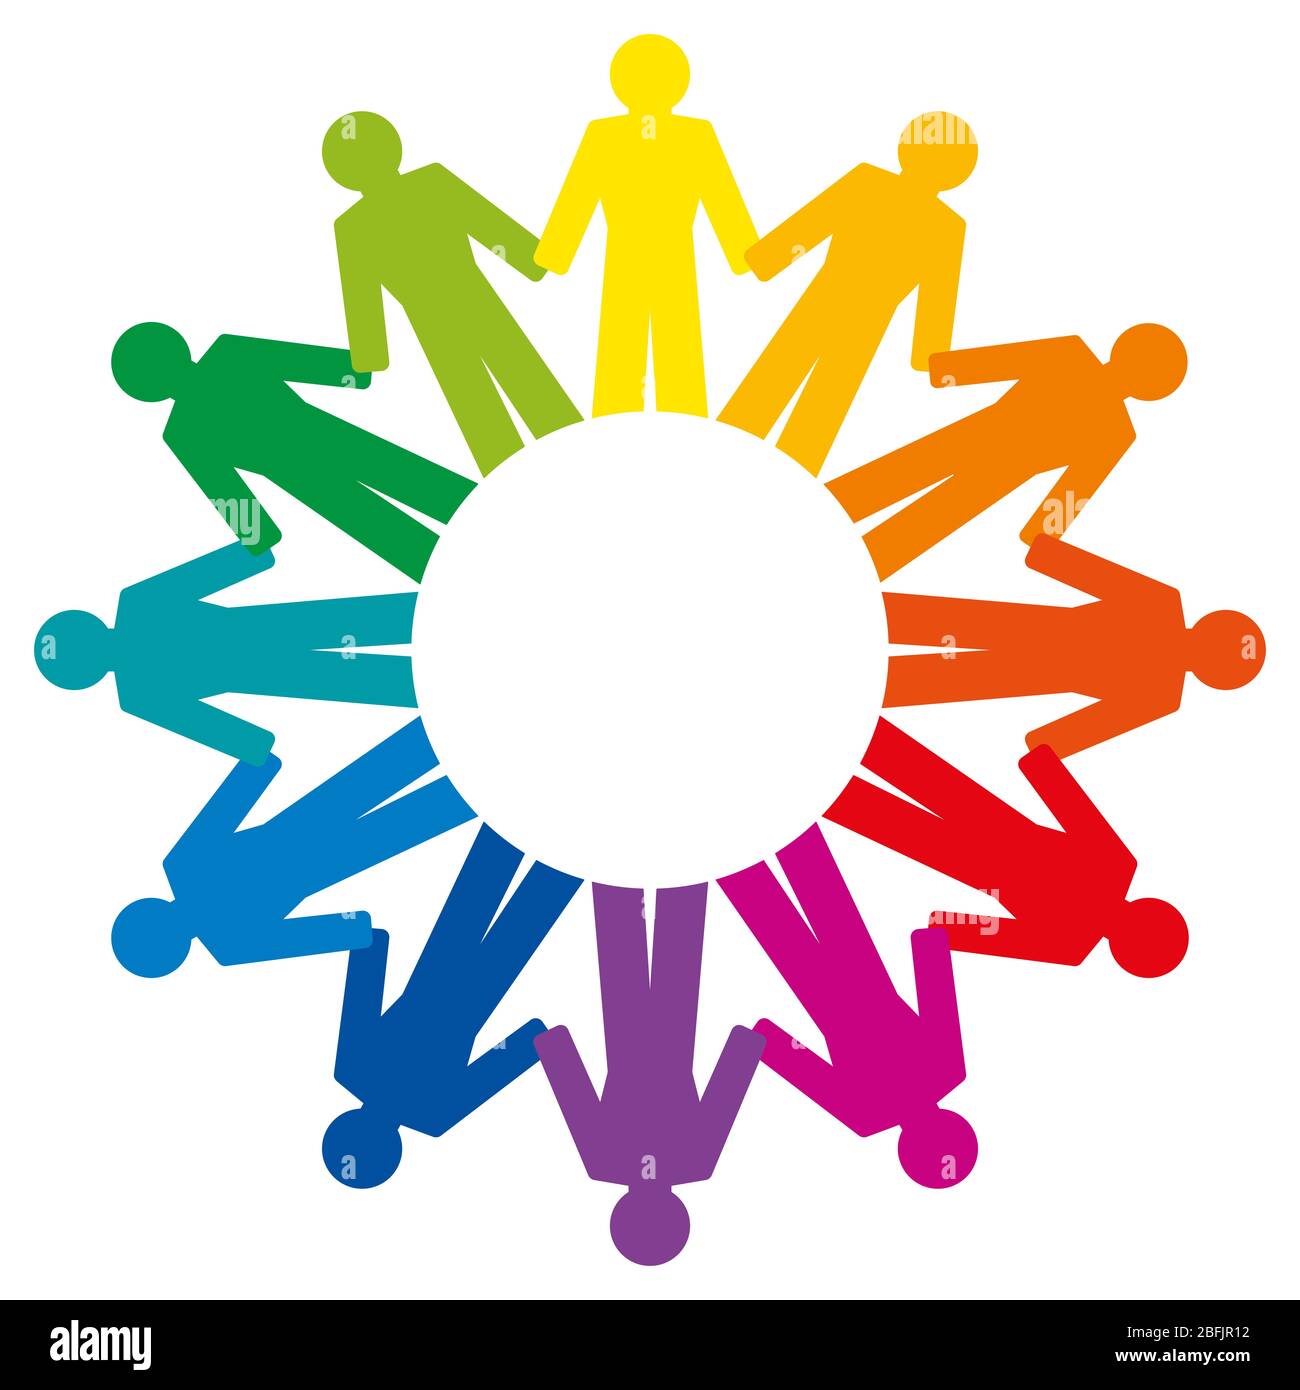 People holding hands, forming a rainbow circle. Abstract symbol of connected people standing a circle to express friendship, love and harmony. Stock Photo